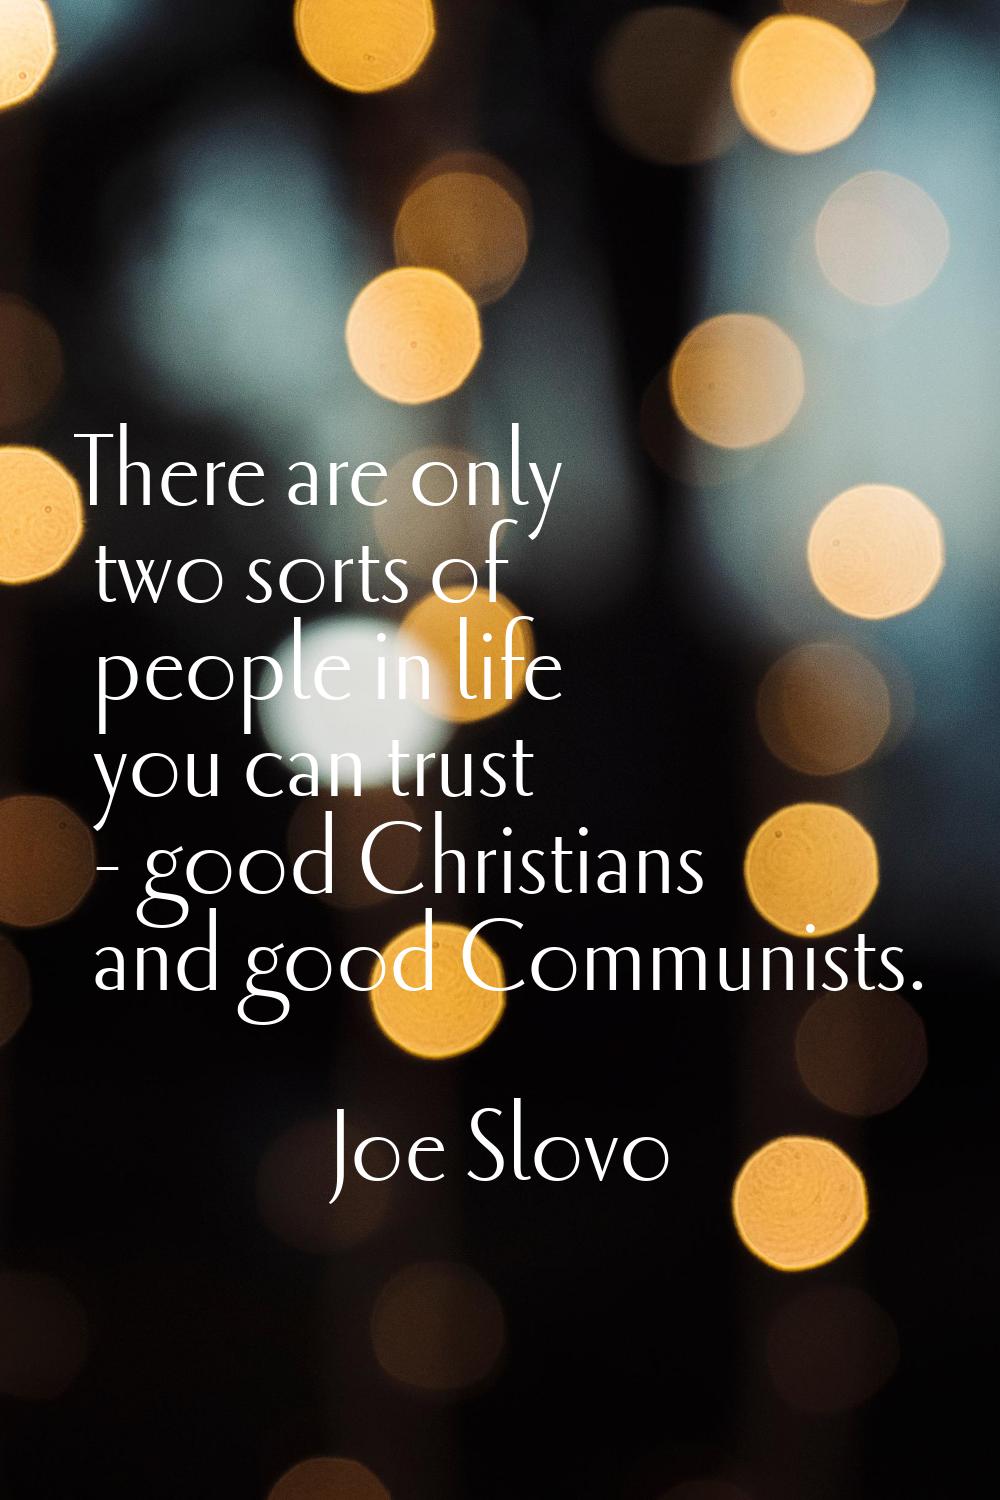 There are only two sorts of people in life you can trust - good Christians and good Communists.